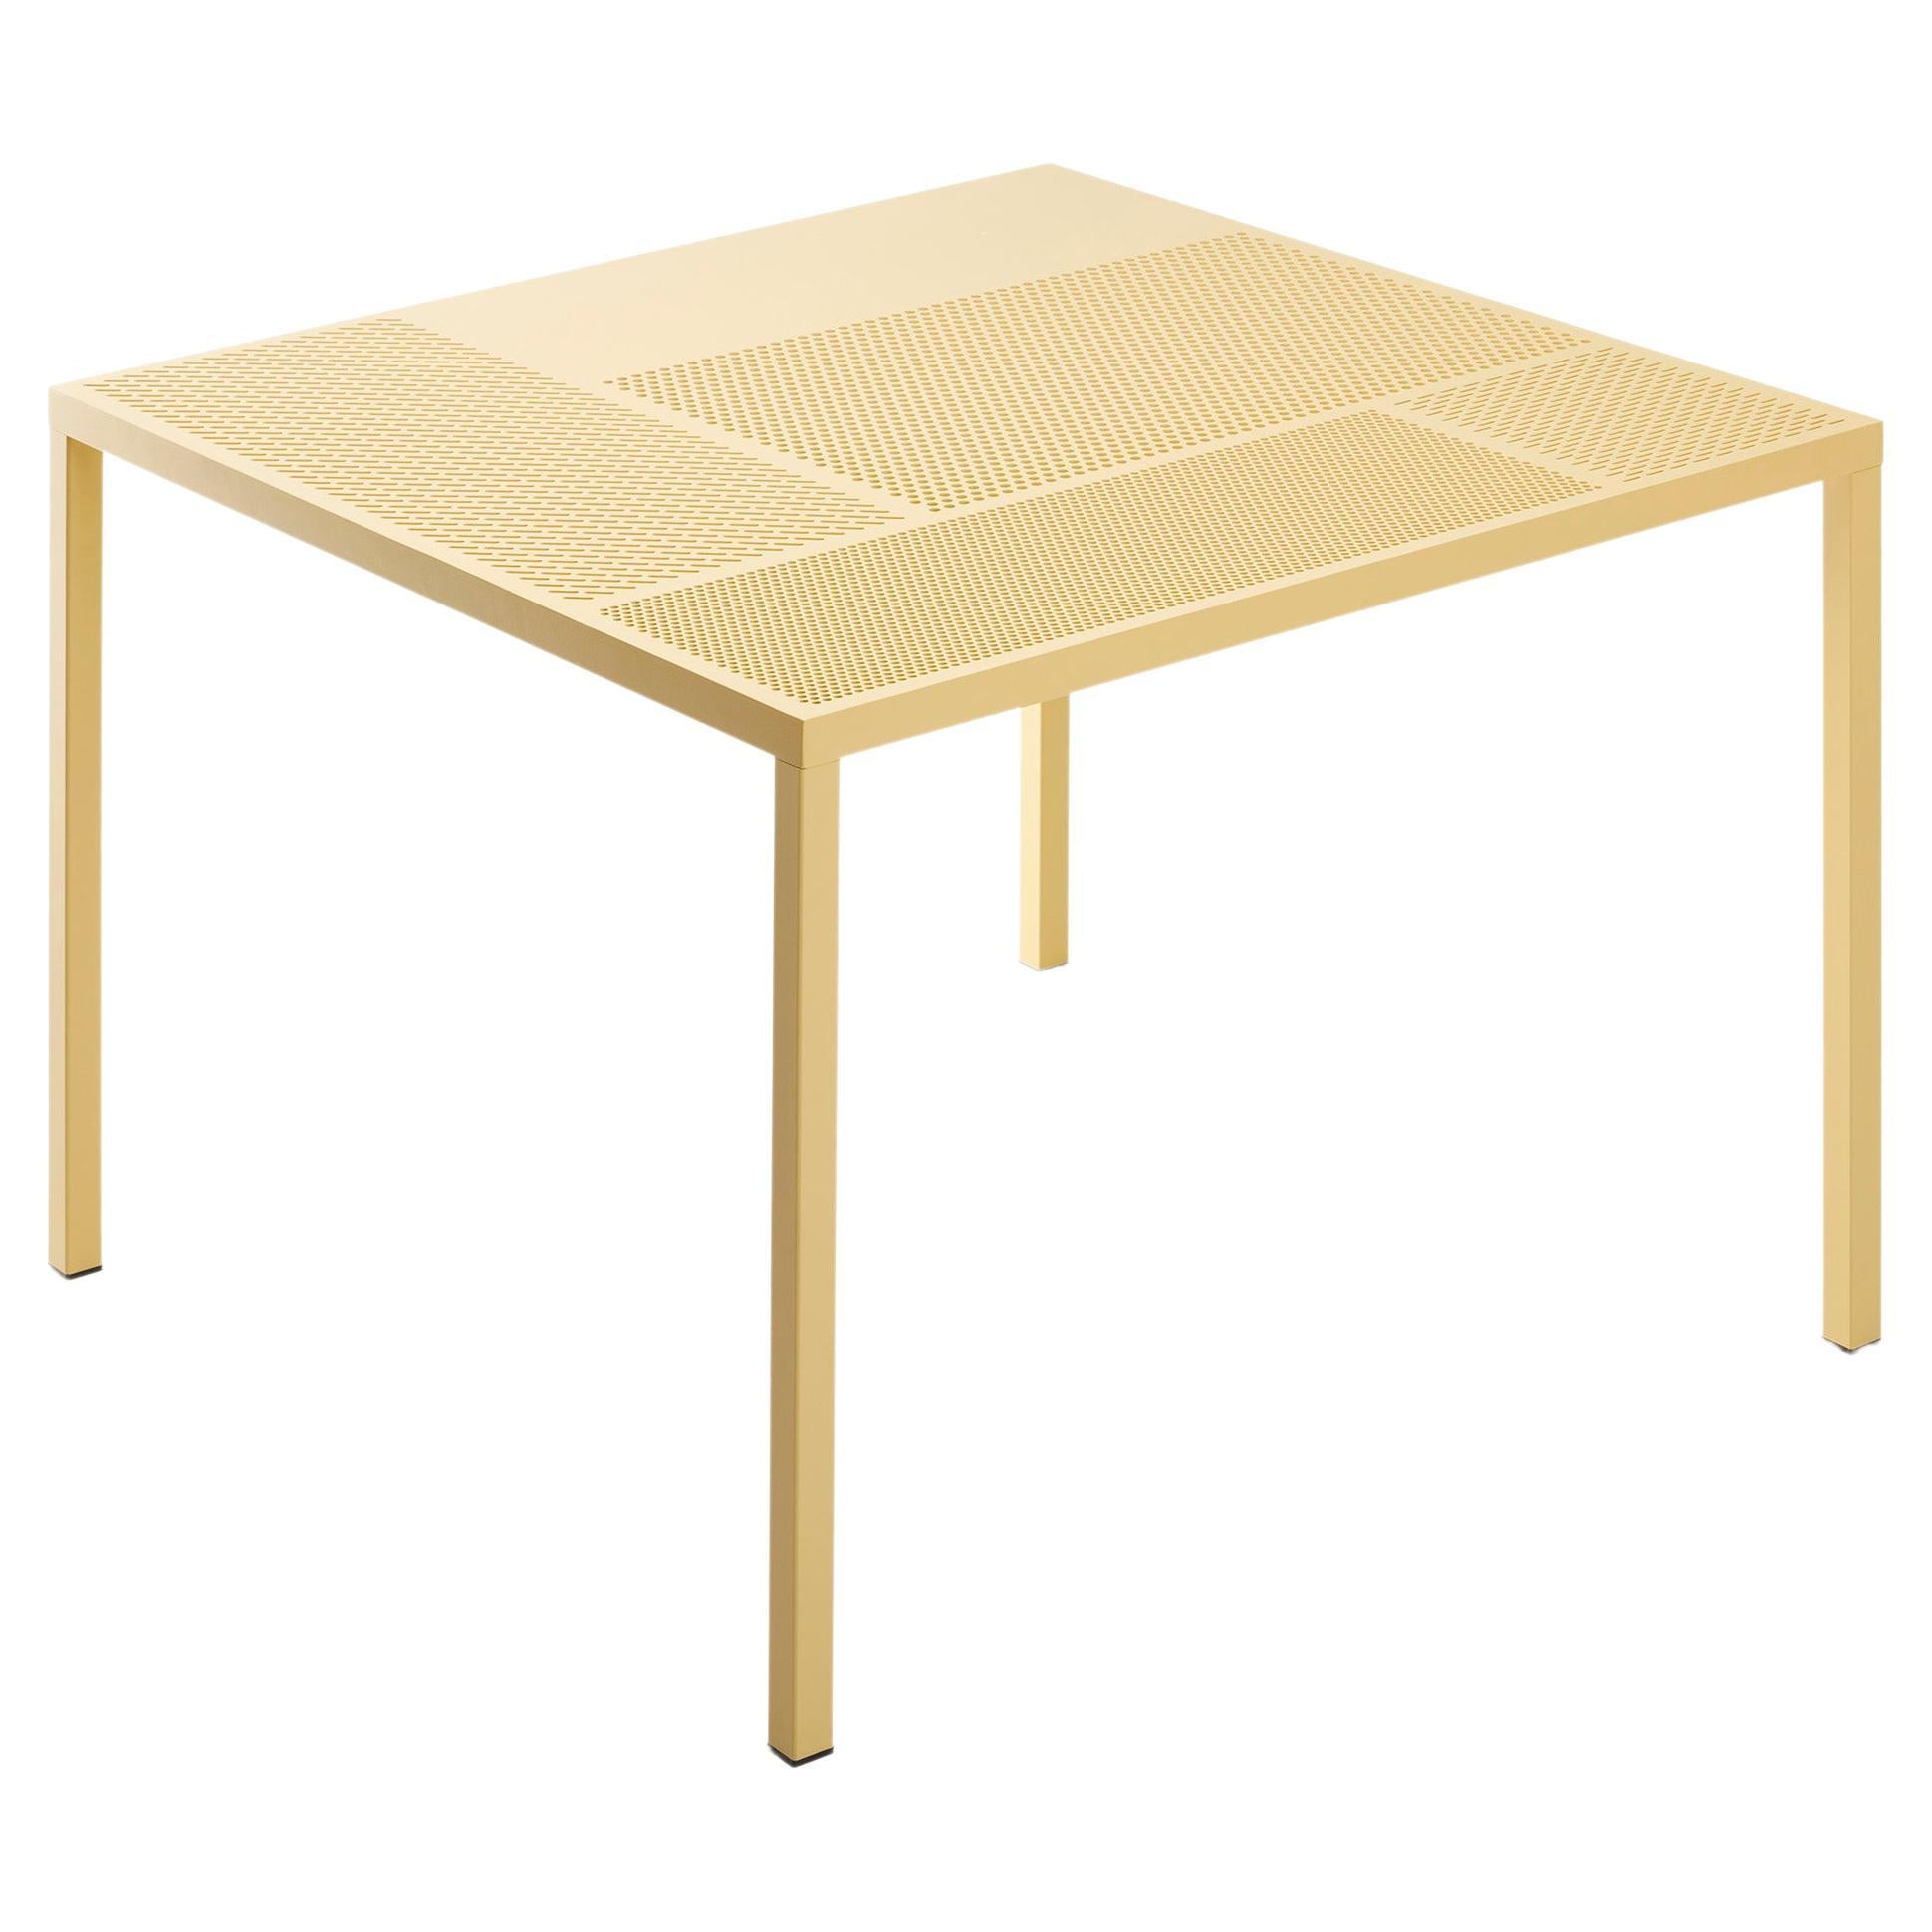 21st Century Modern Perforated Steel Sheet Table for Outdoor Neo Made in Italy For Sale